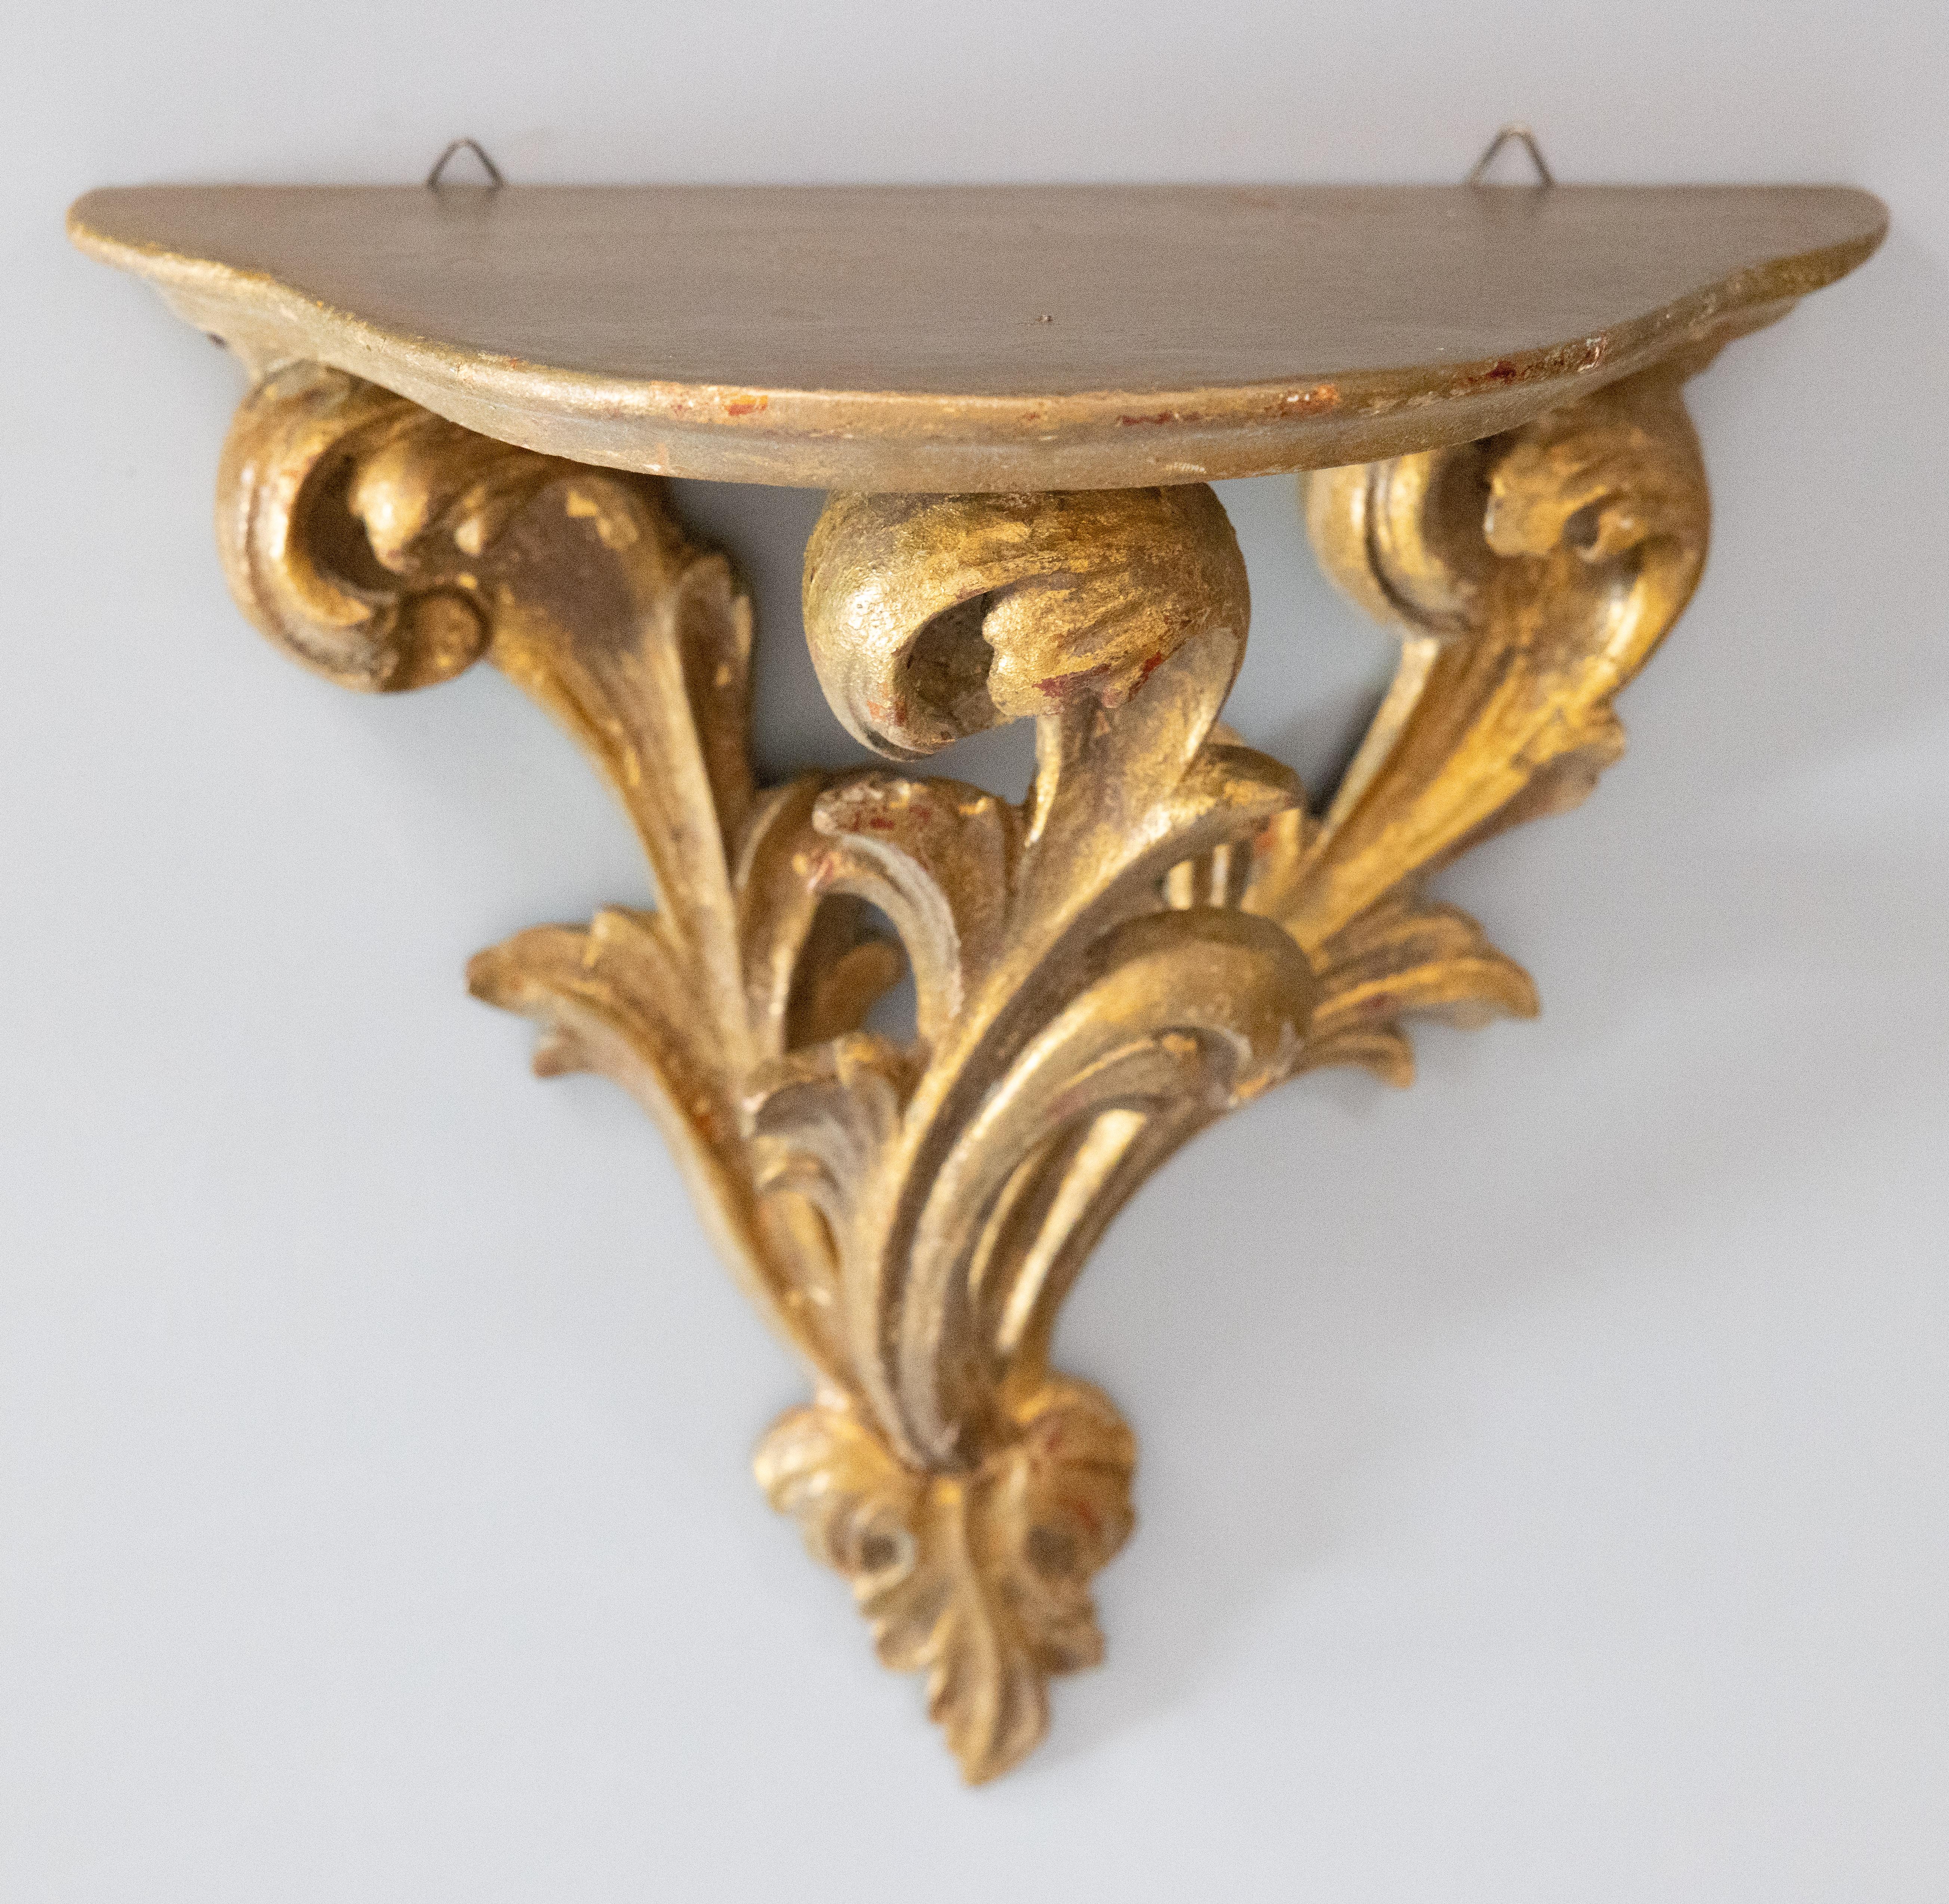 A stunning Mid-Century Italian giltwood wall bracket shelf with a hand carved scrolling acanthus leaf design in a lovely gilt patina, circa 1950. Marked 